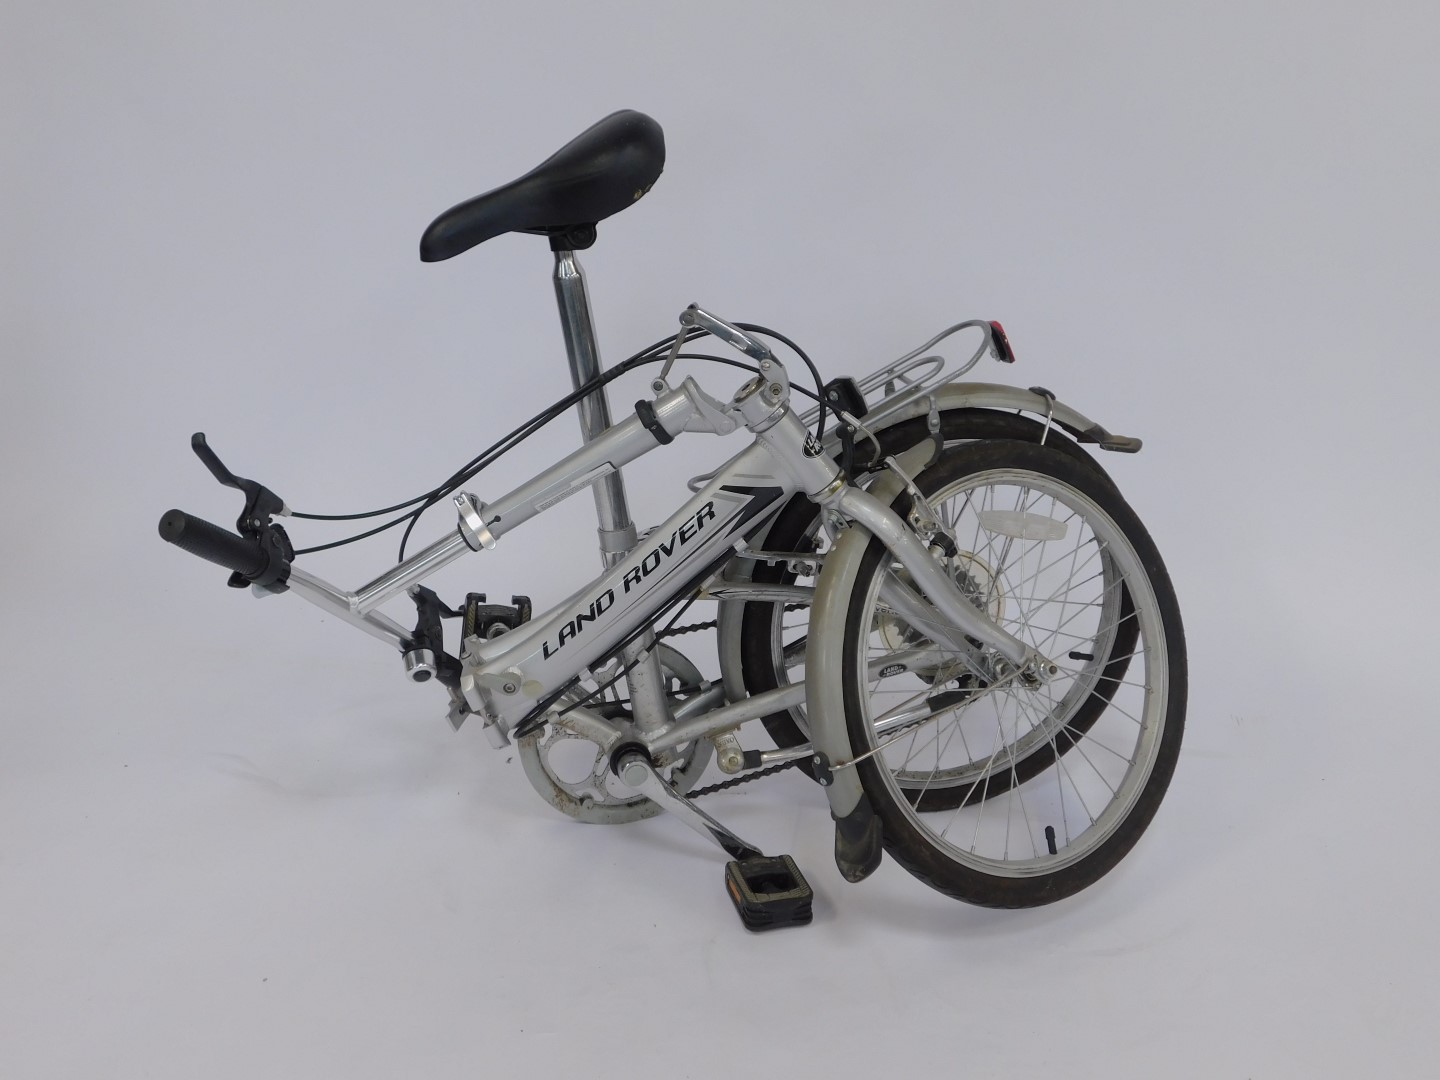 A City Lite Land Rover folding bicycle. - Image 5 of 5